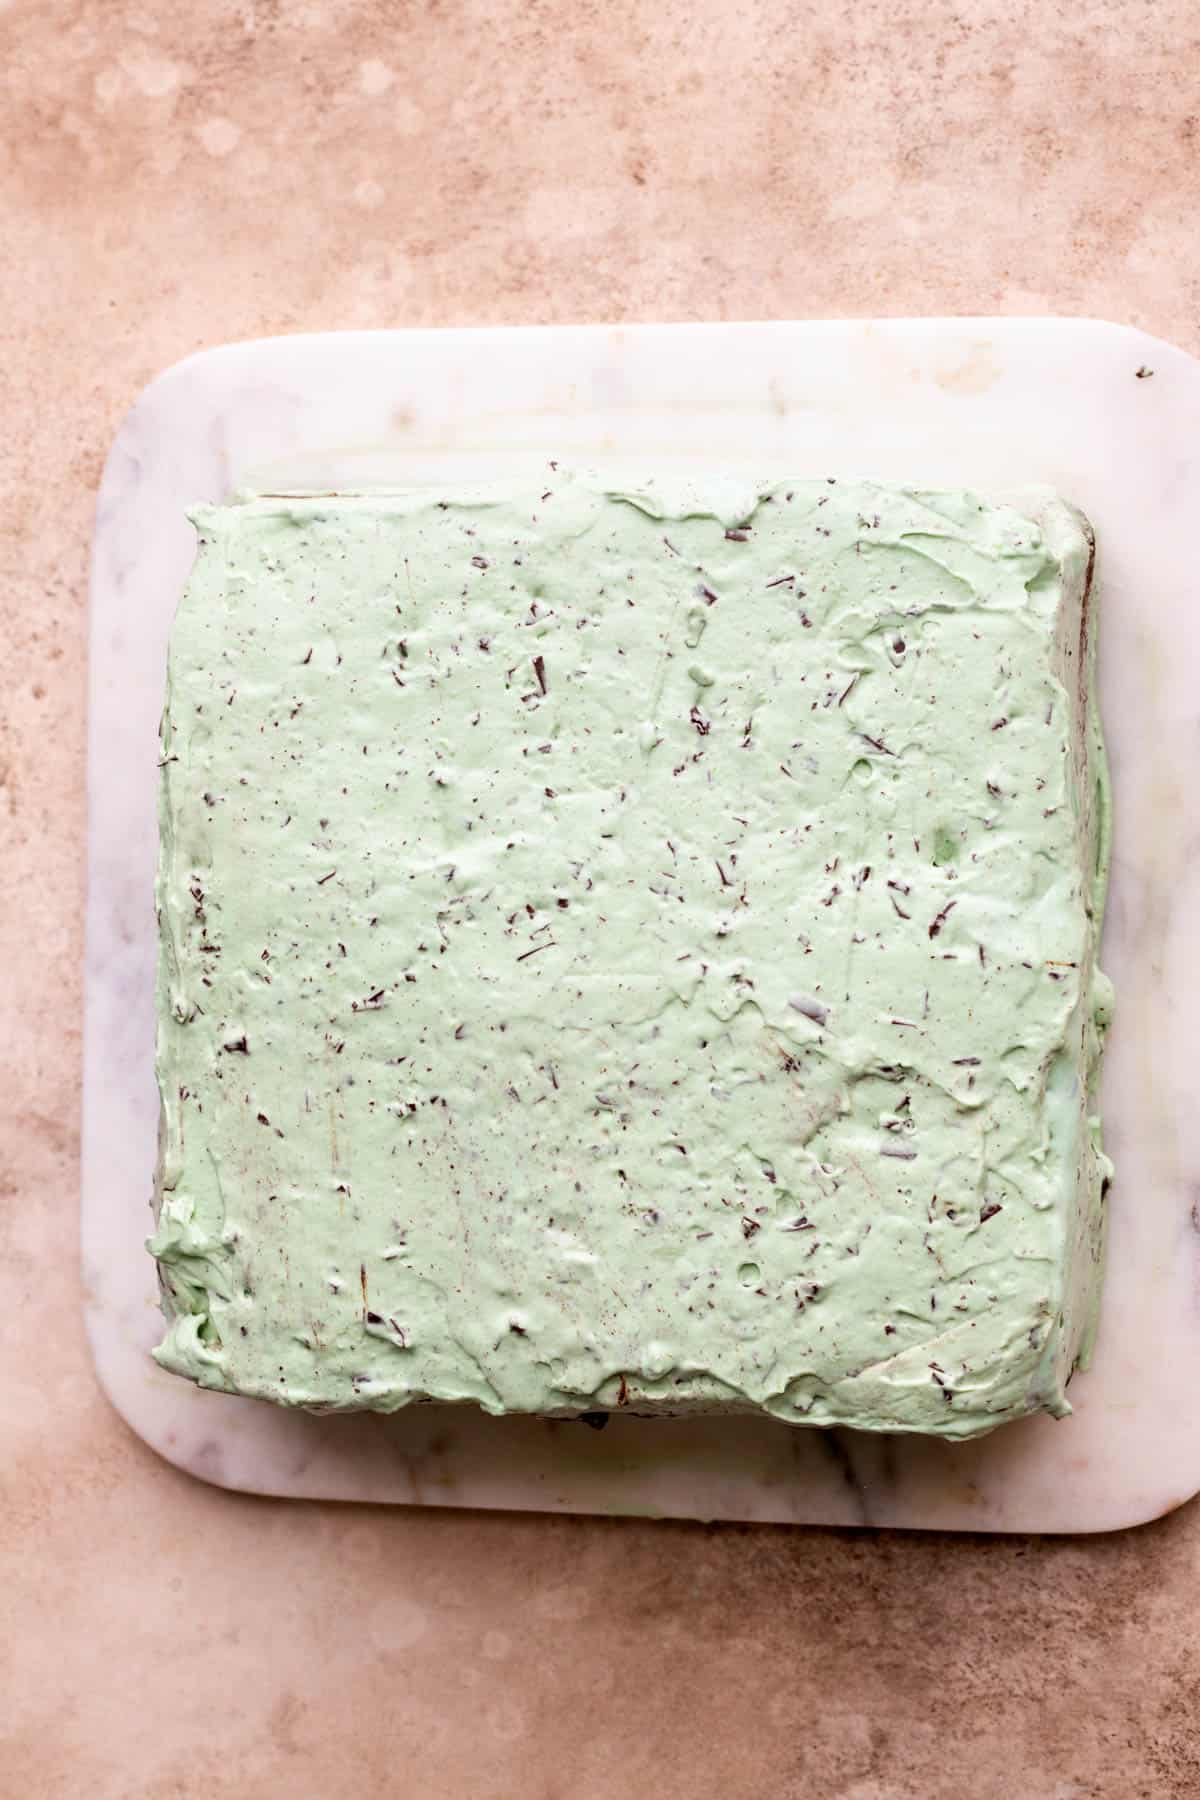 Mint whipped cream on top of ice cream.